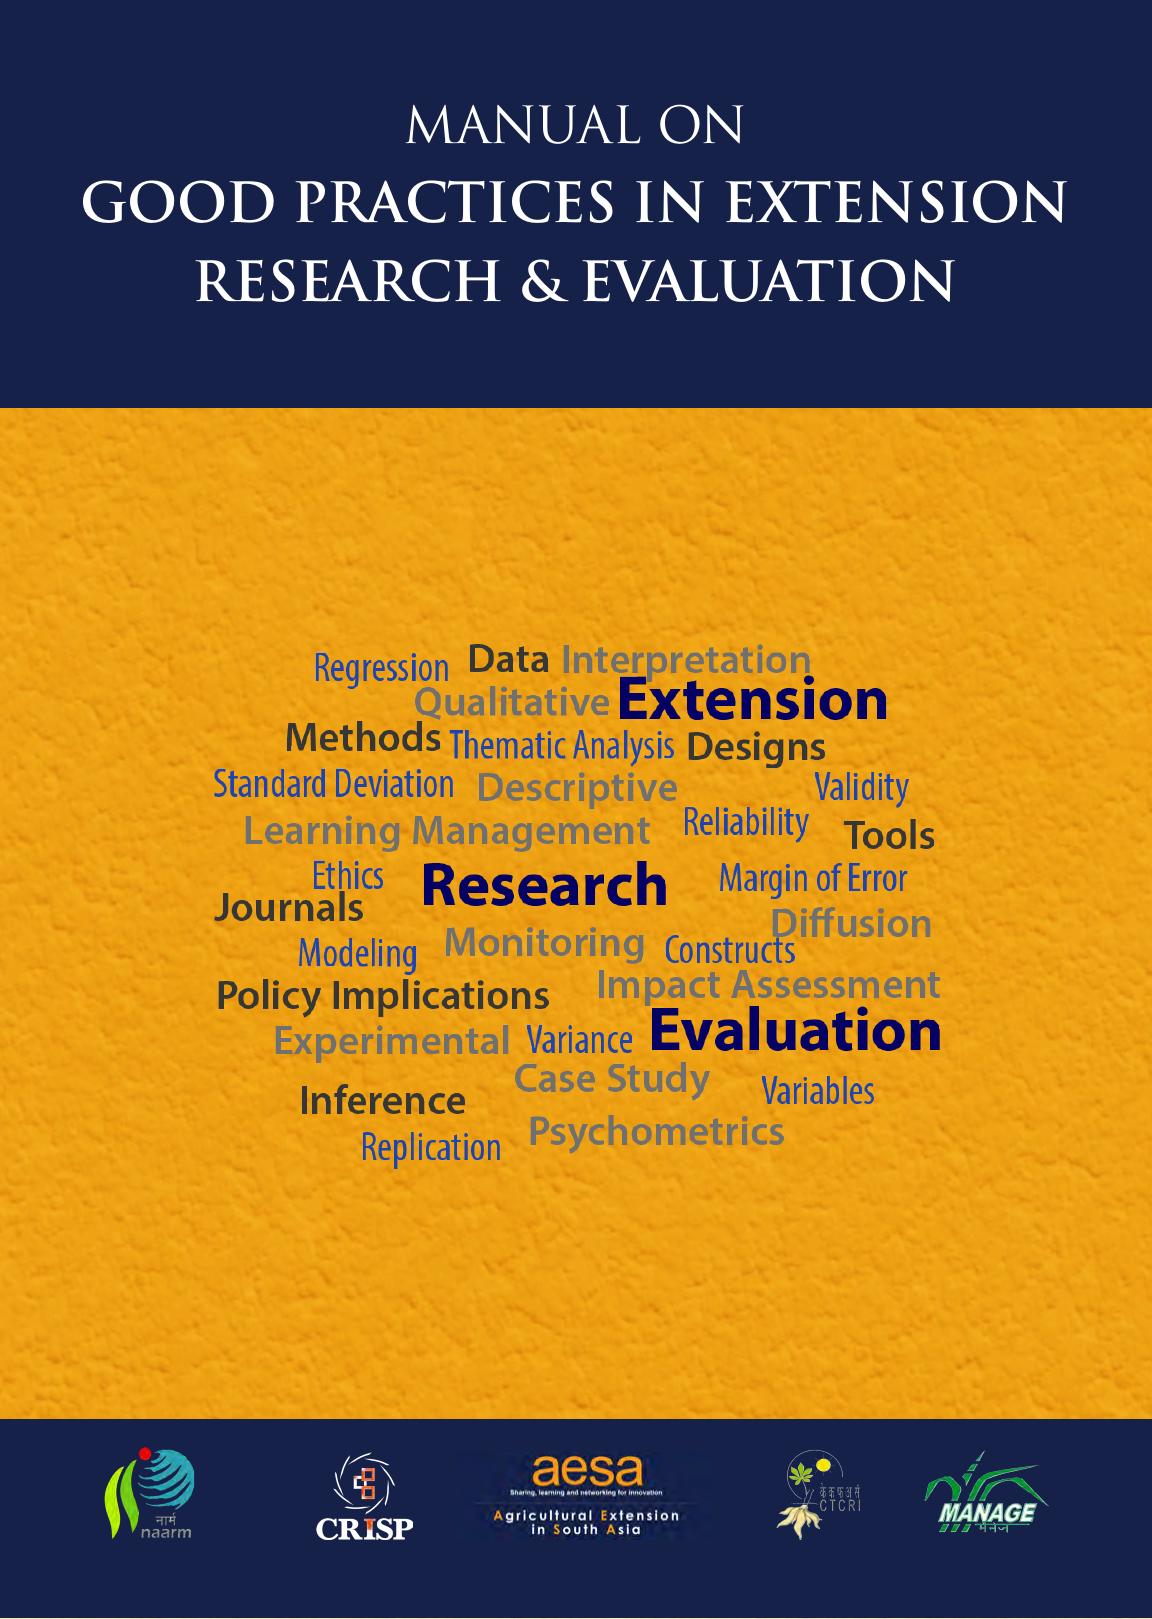 GOOD PRACTICES IN EXTENSION RESEARCH & EVALUATION 2017